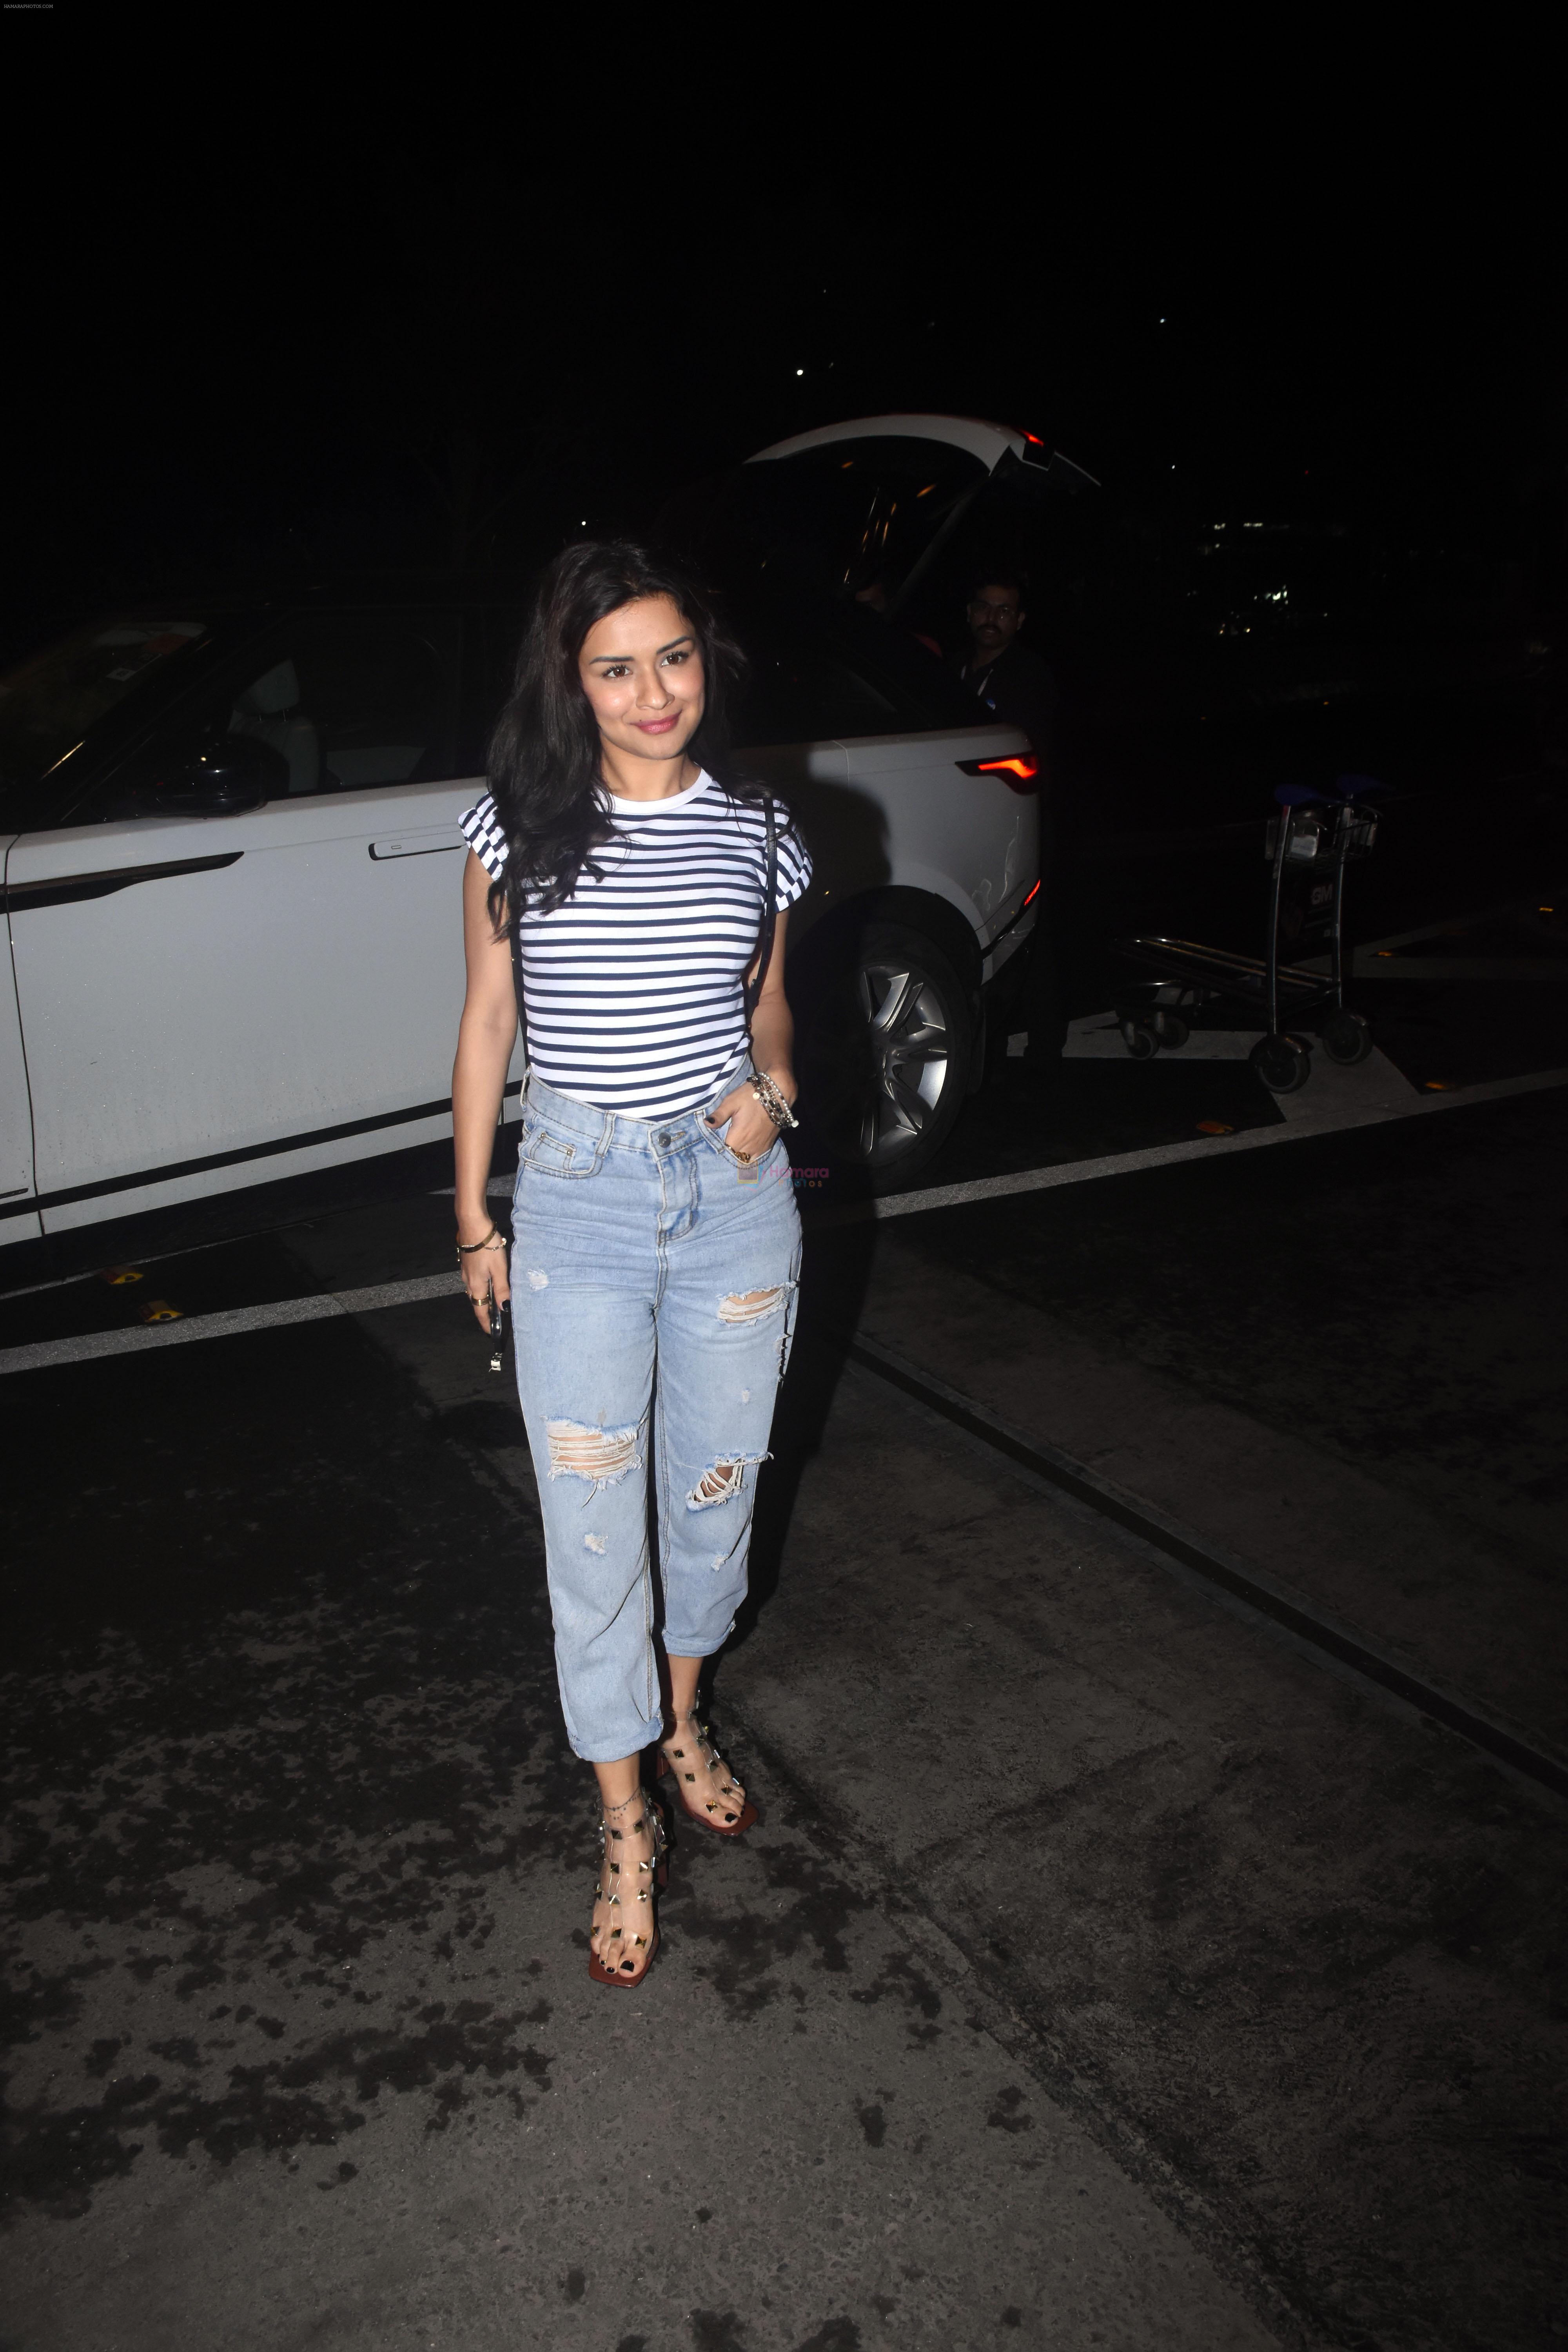 Avneet Kaur dressed in shredded jeans seen at the airport on 1 July 2023